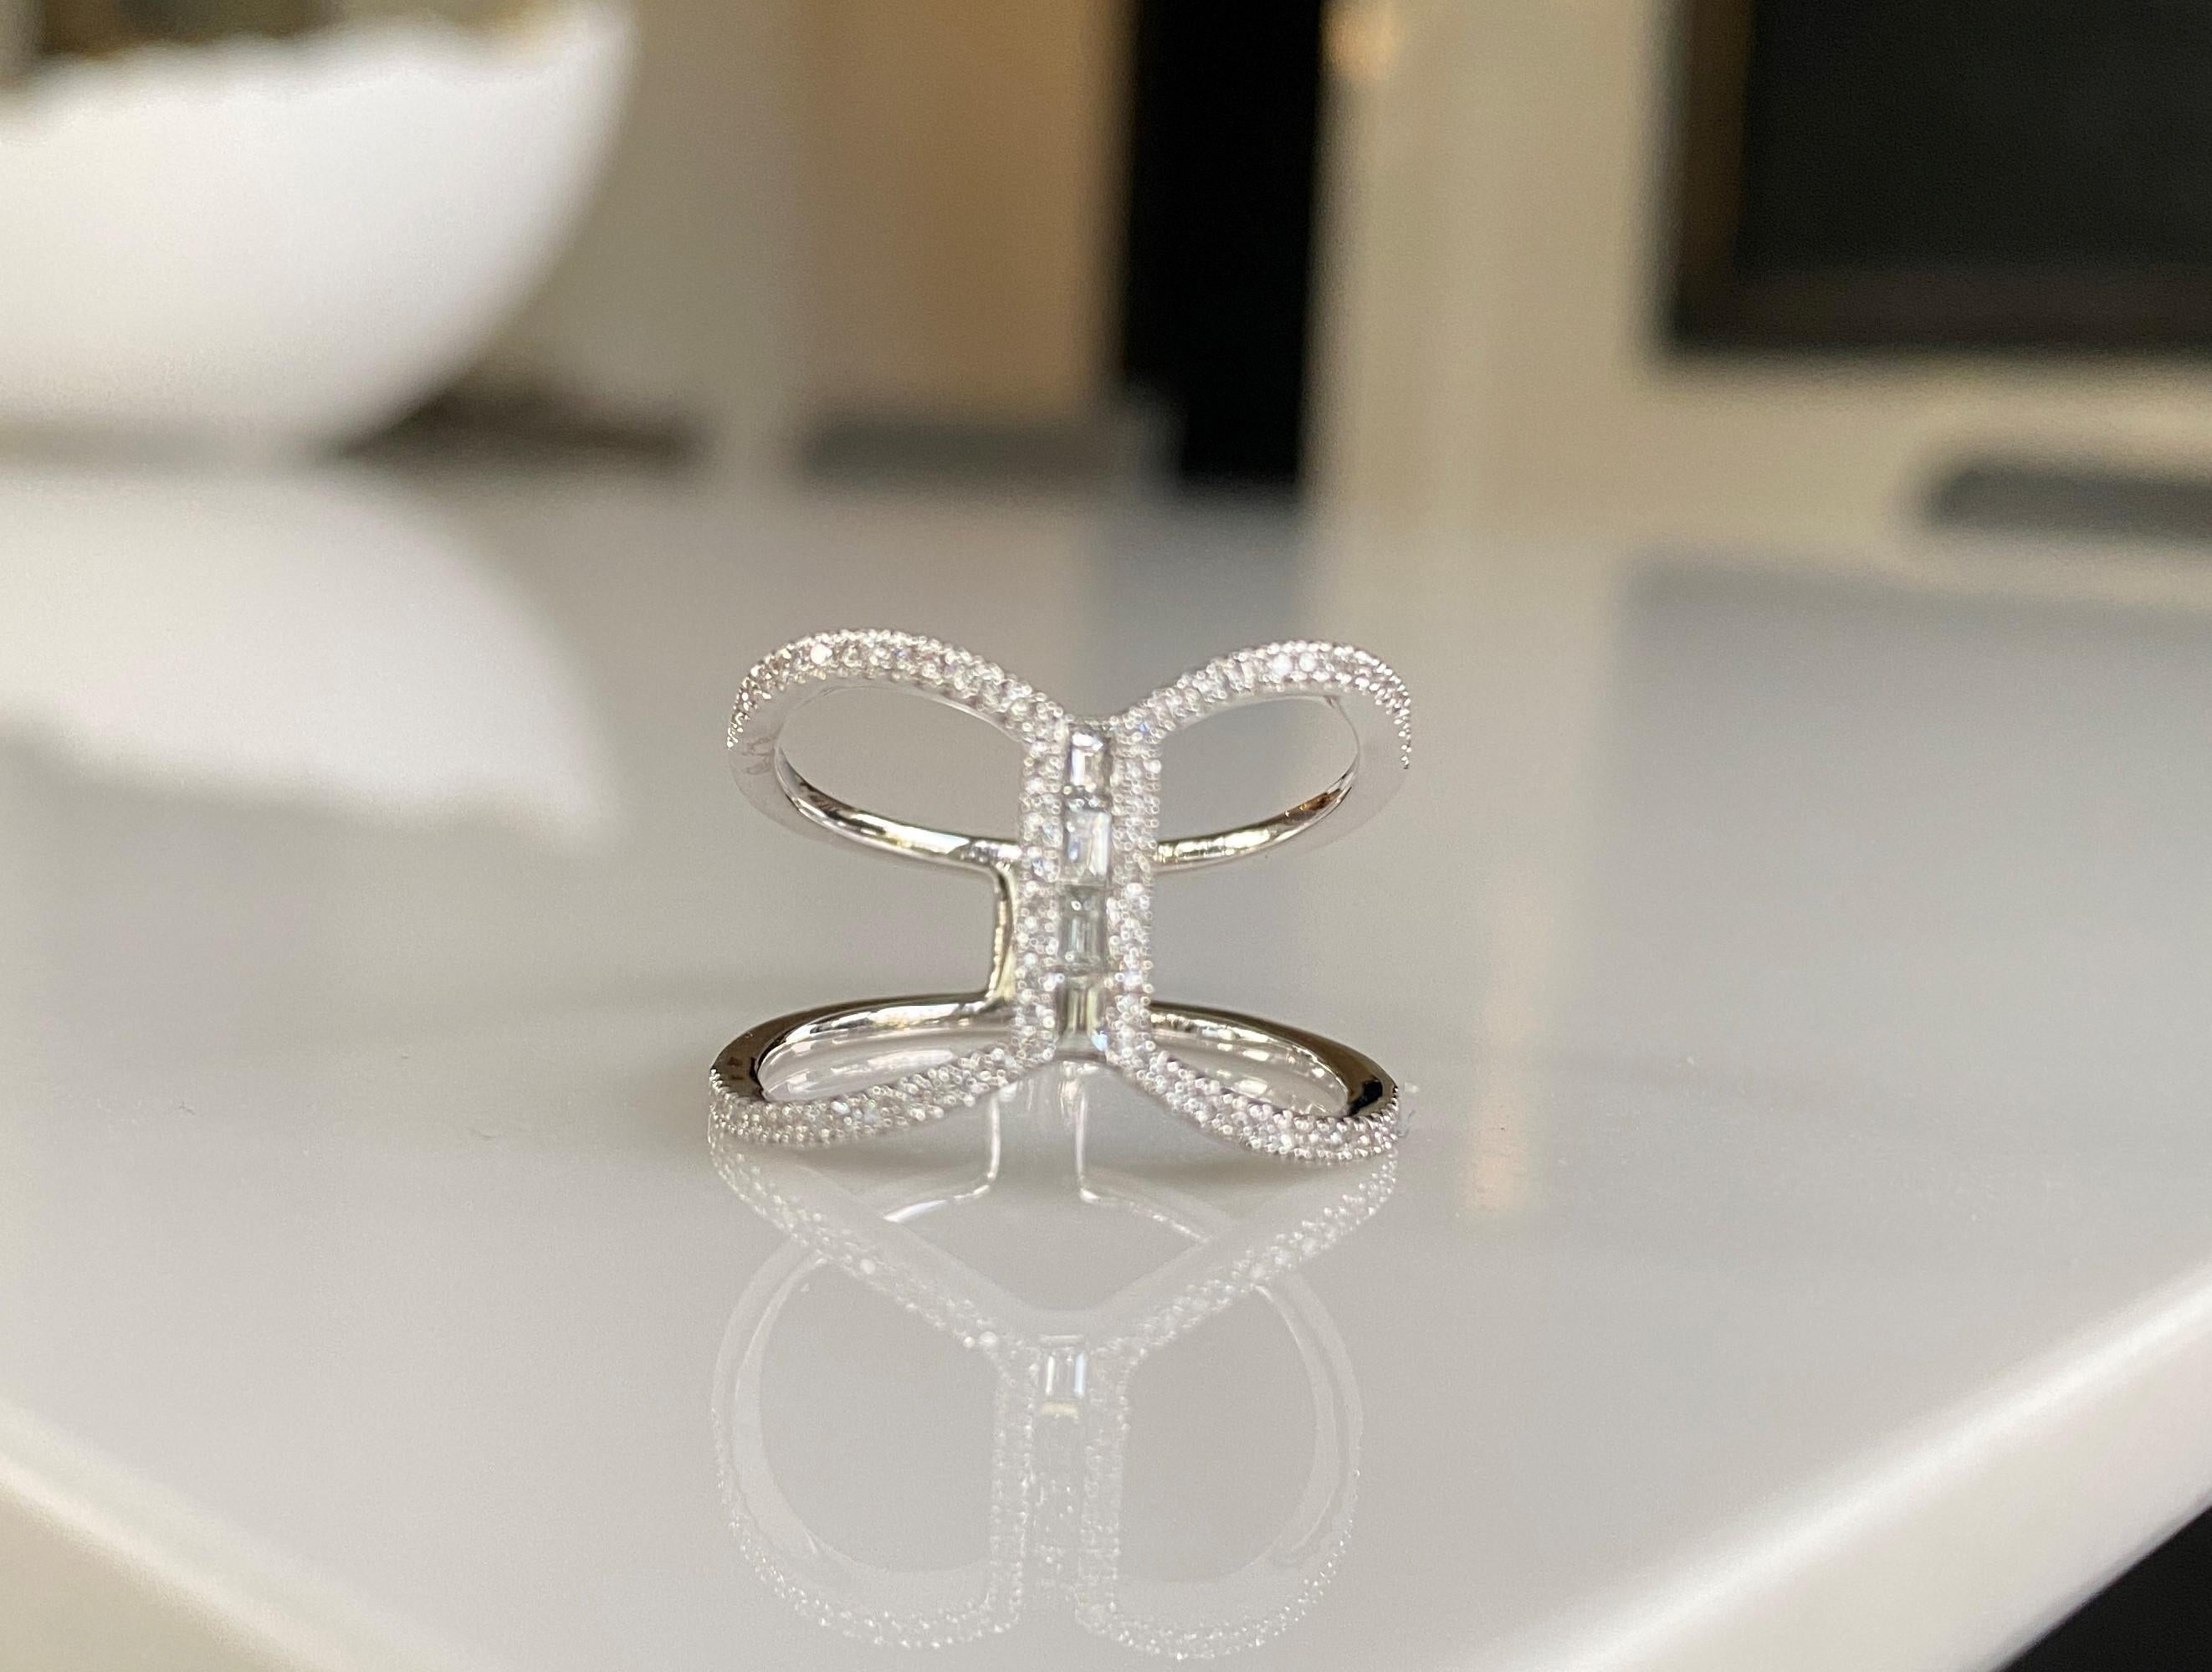 Make a statement with this exquisite ring with pave brilliant cut diamonds and generously sized white diamond baguettes. Dress up or down, wear it as a cocktail ring or alternative bridal band or engagement ring.  